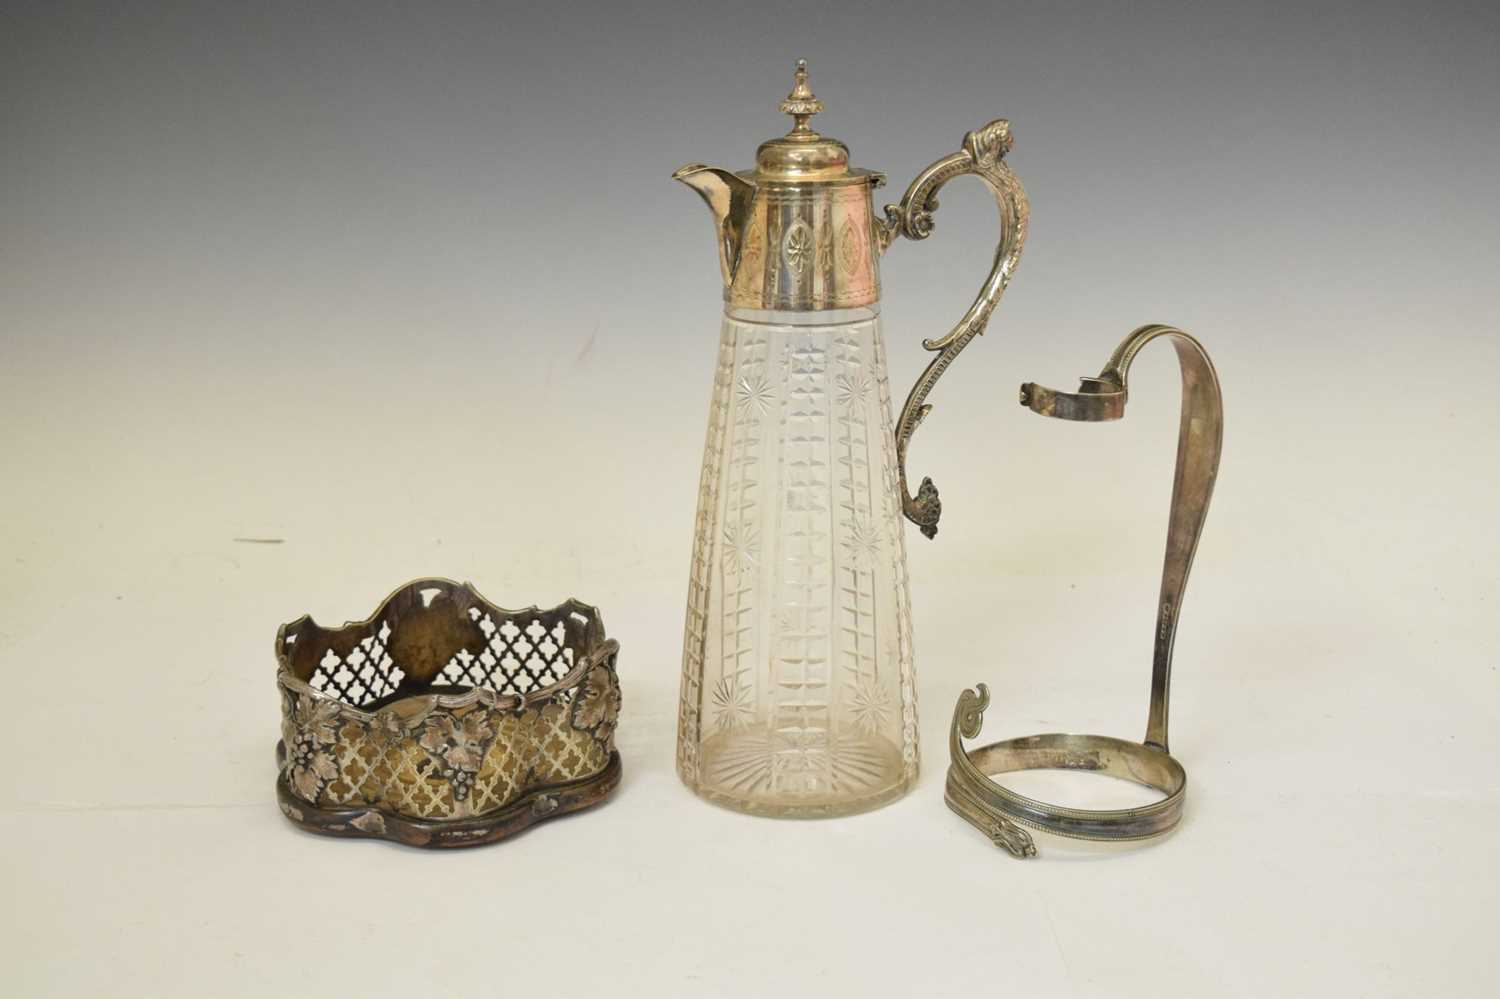 Victorian cut glass claret jug, a silver plated bottle coaster, and a wine bottle carrier - Image 2 of 10